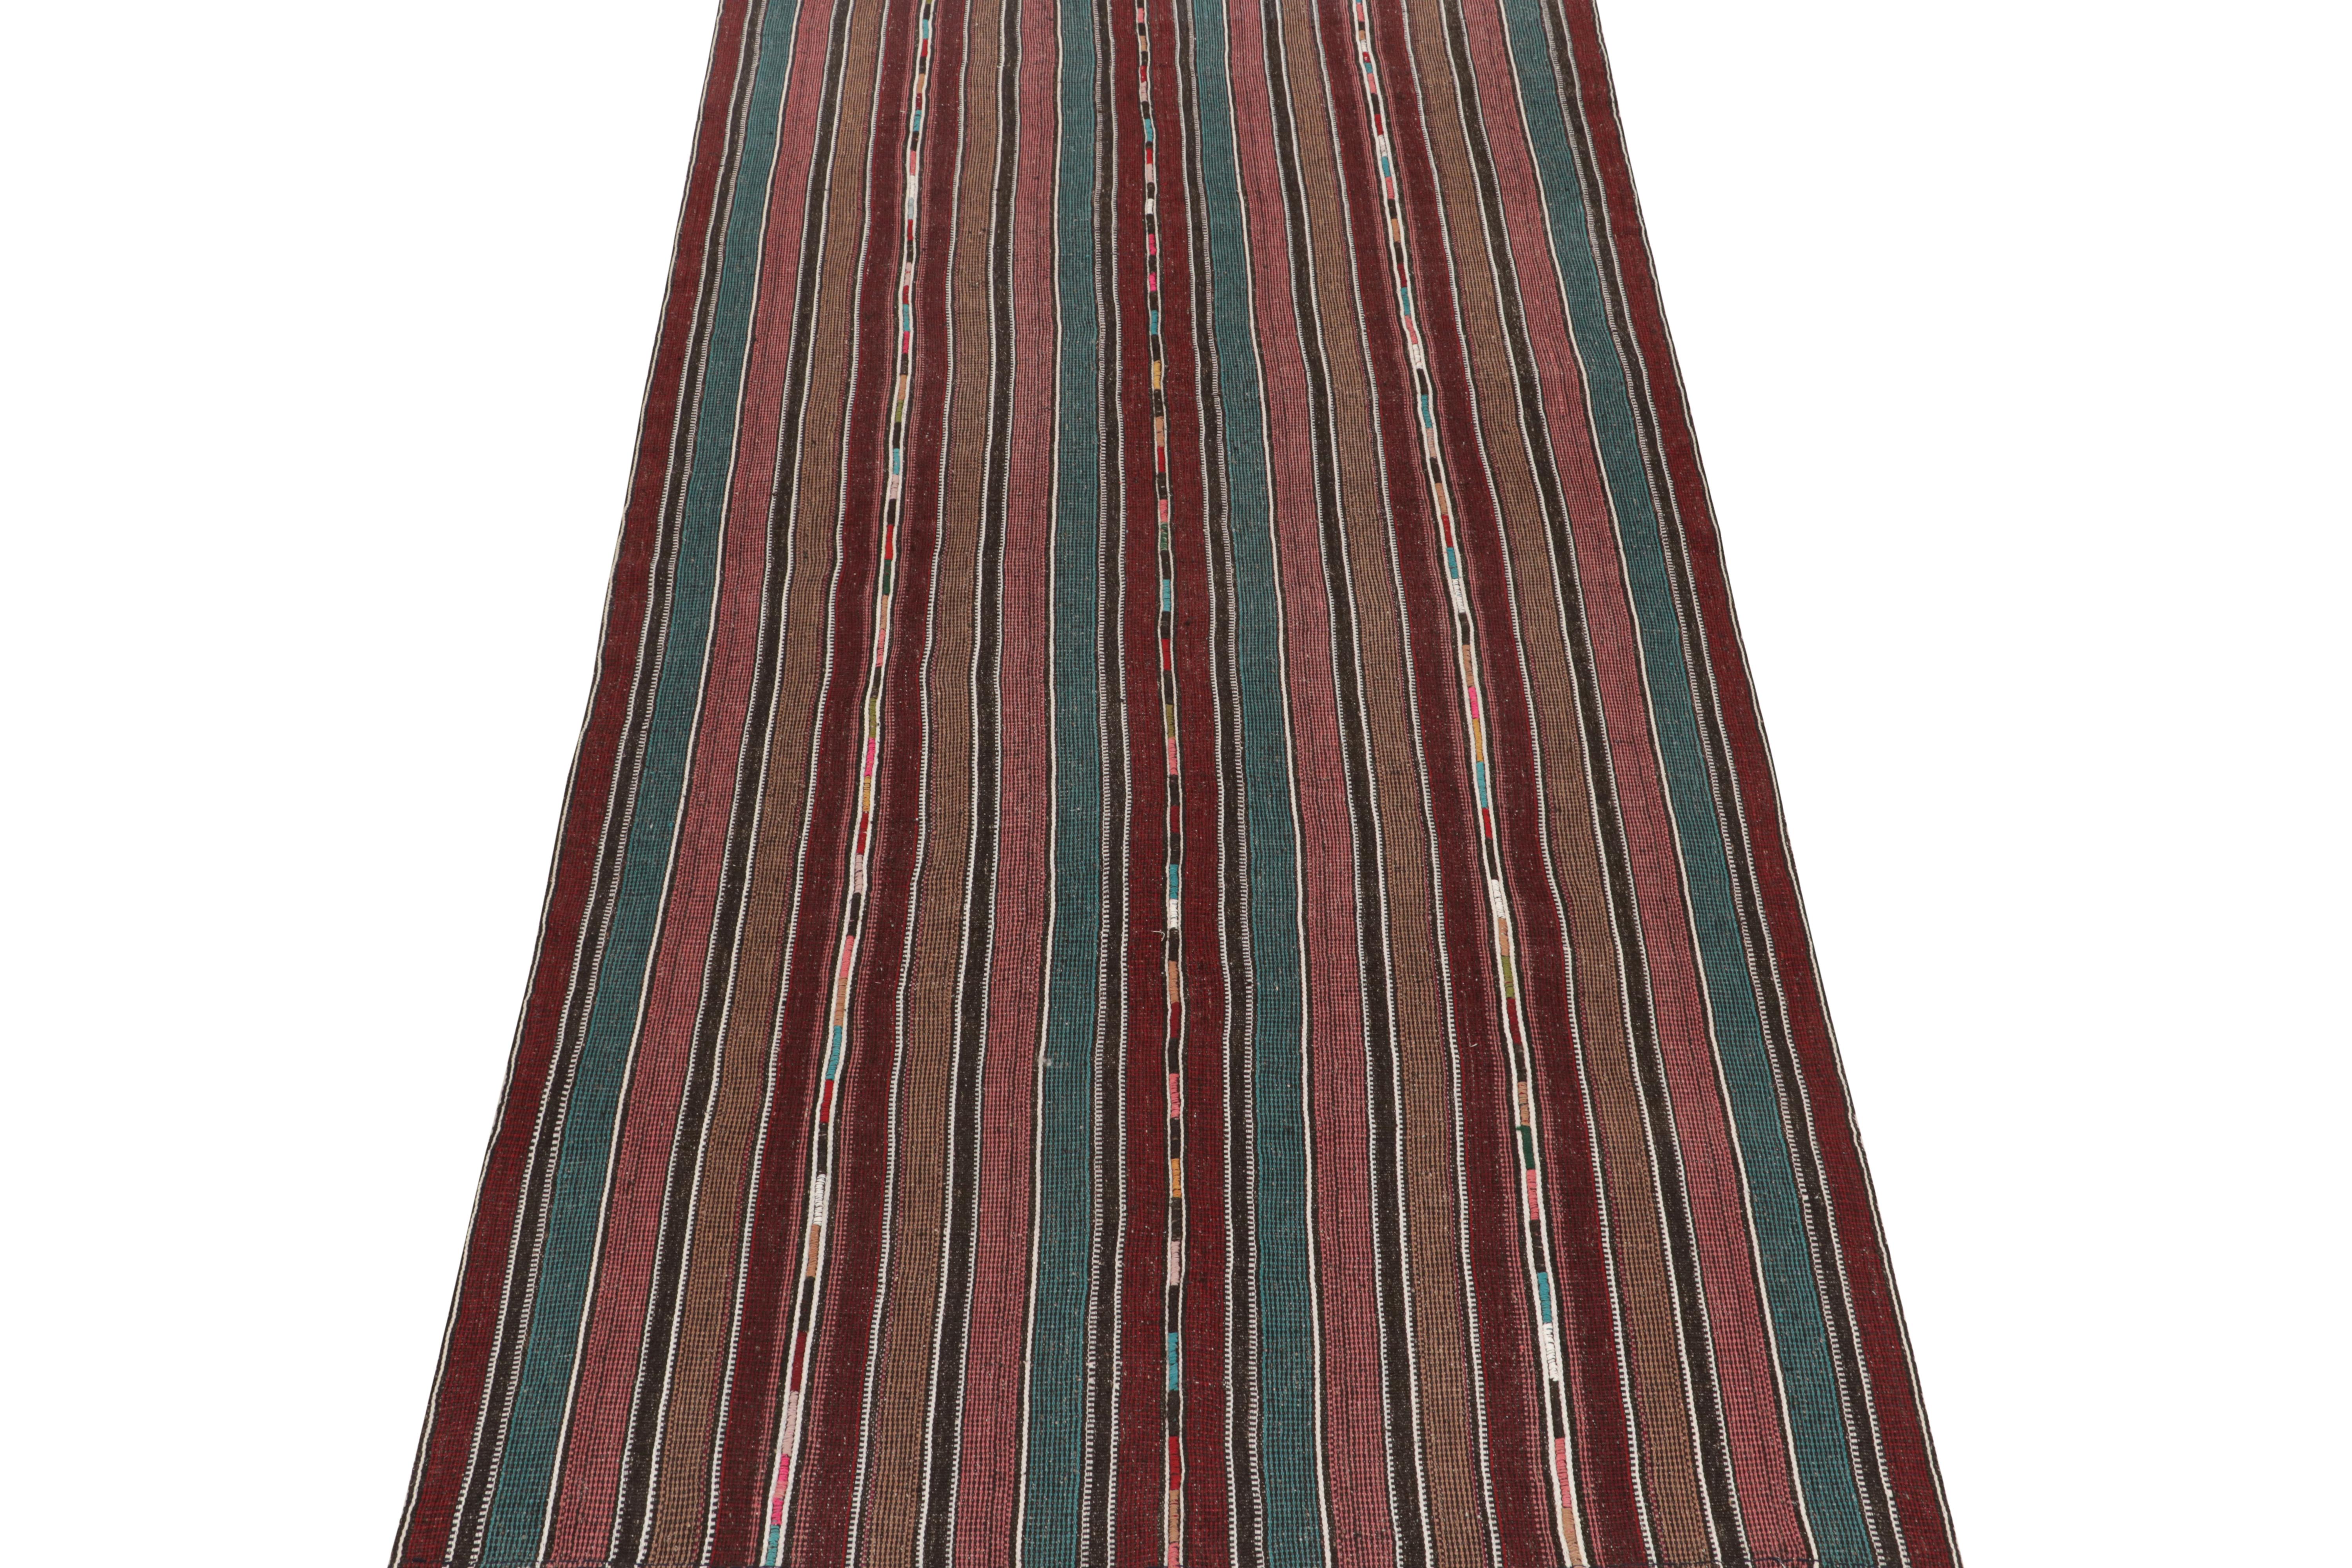 This vintage 6x12 Shahsavan Persian kilim is a unique tribal rug for its period—handwoven in wool circa 1950-1960. 

Further on the Design:

The field hosts striations alternating in blue, maroon, brown variations. Connoisseurs will note the rarity